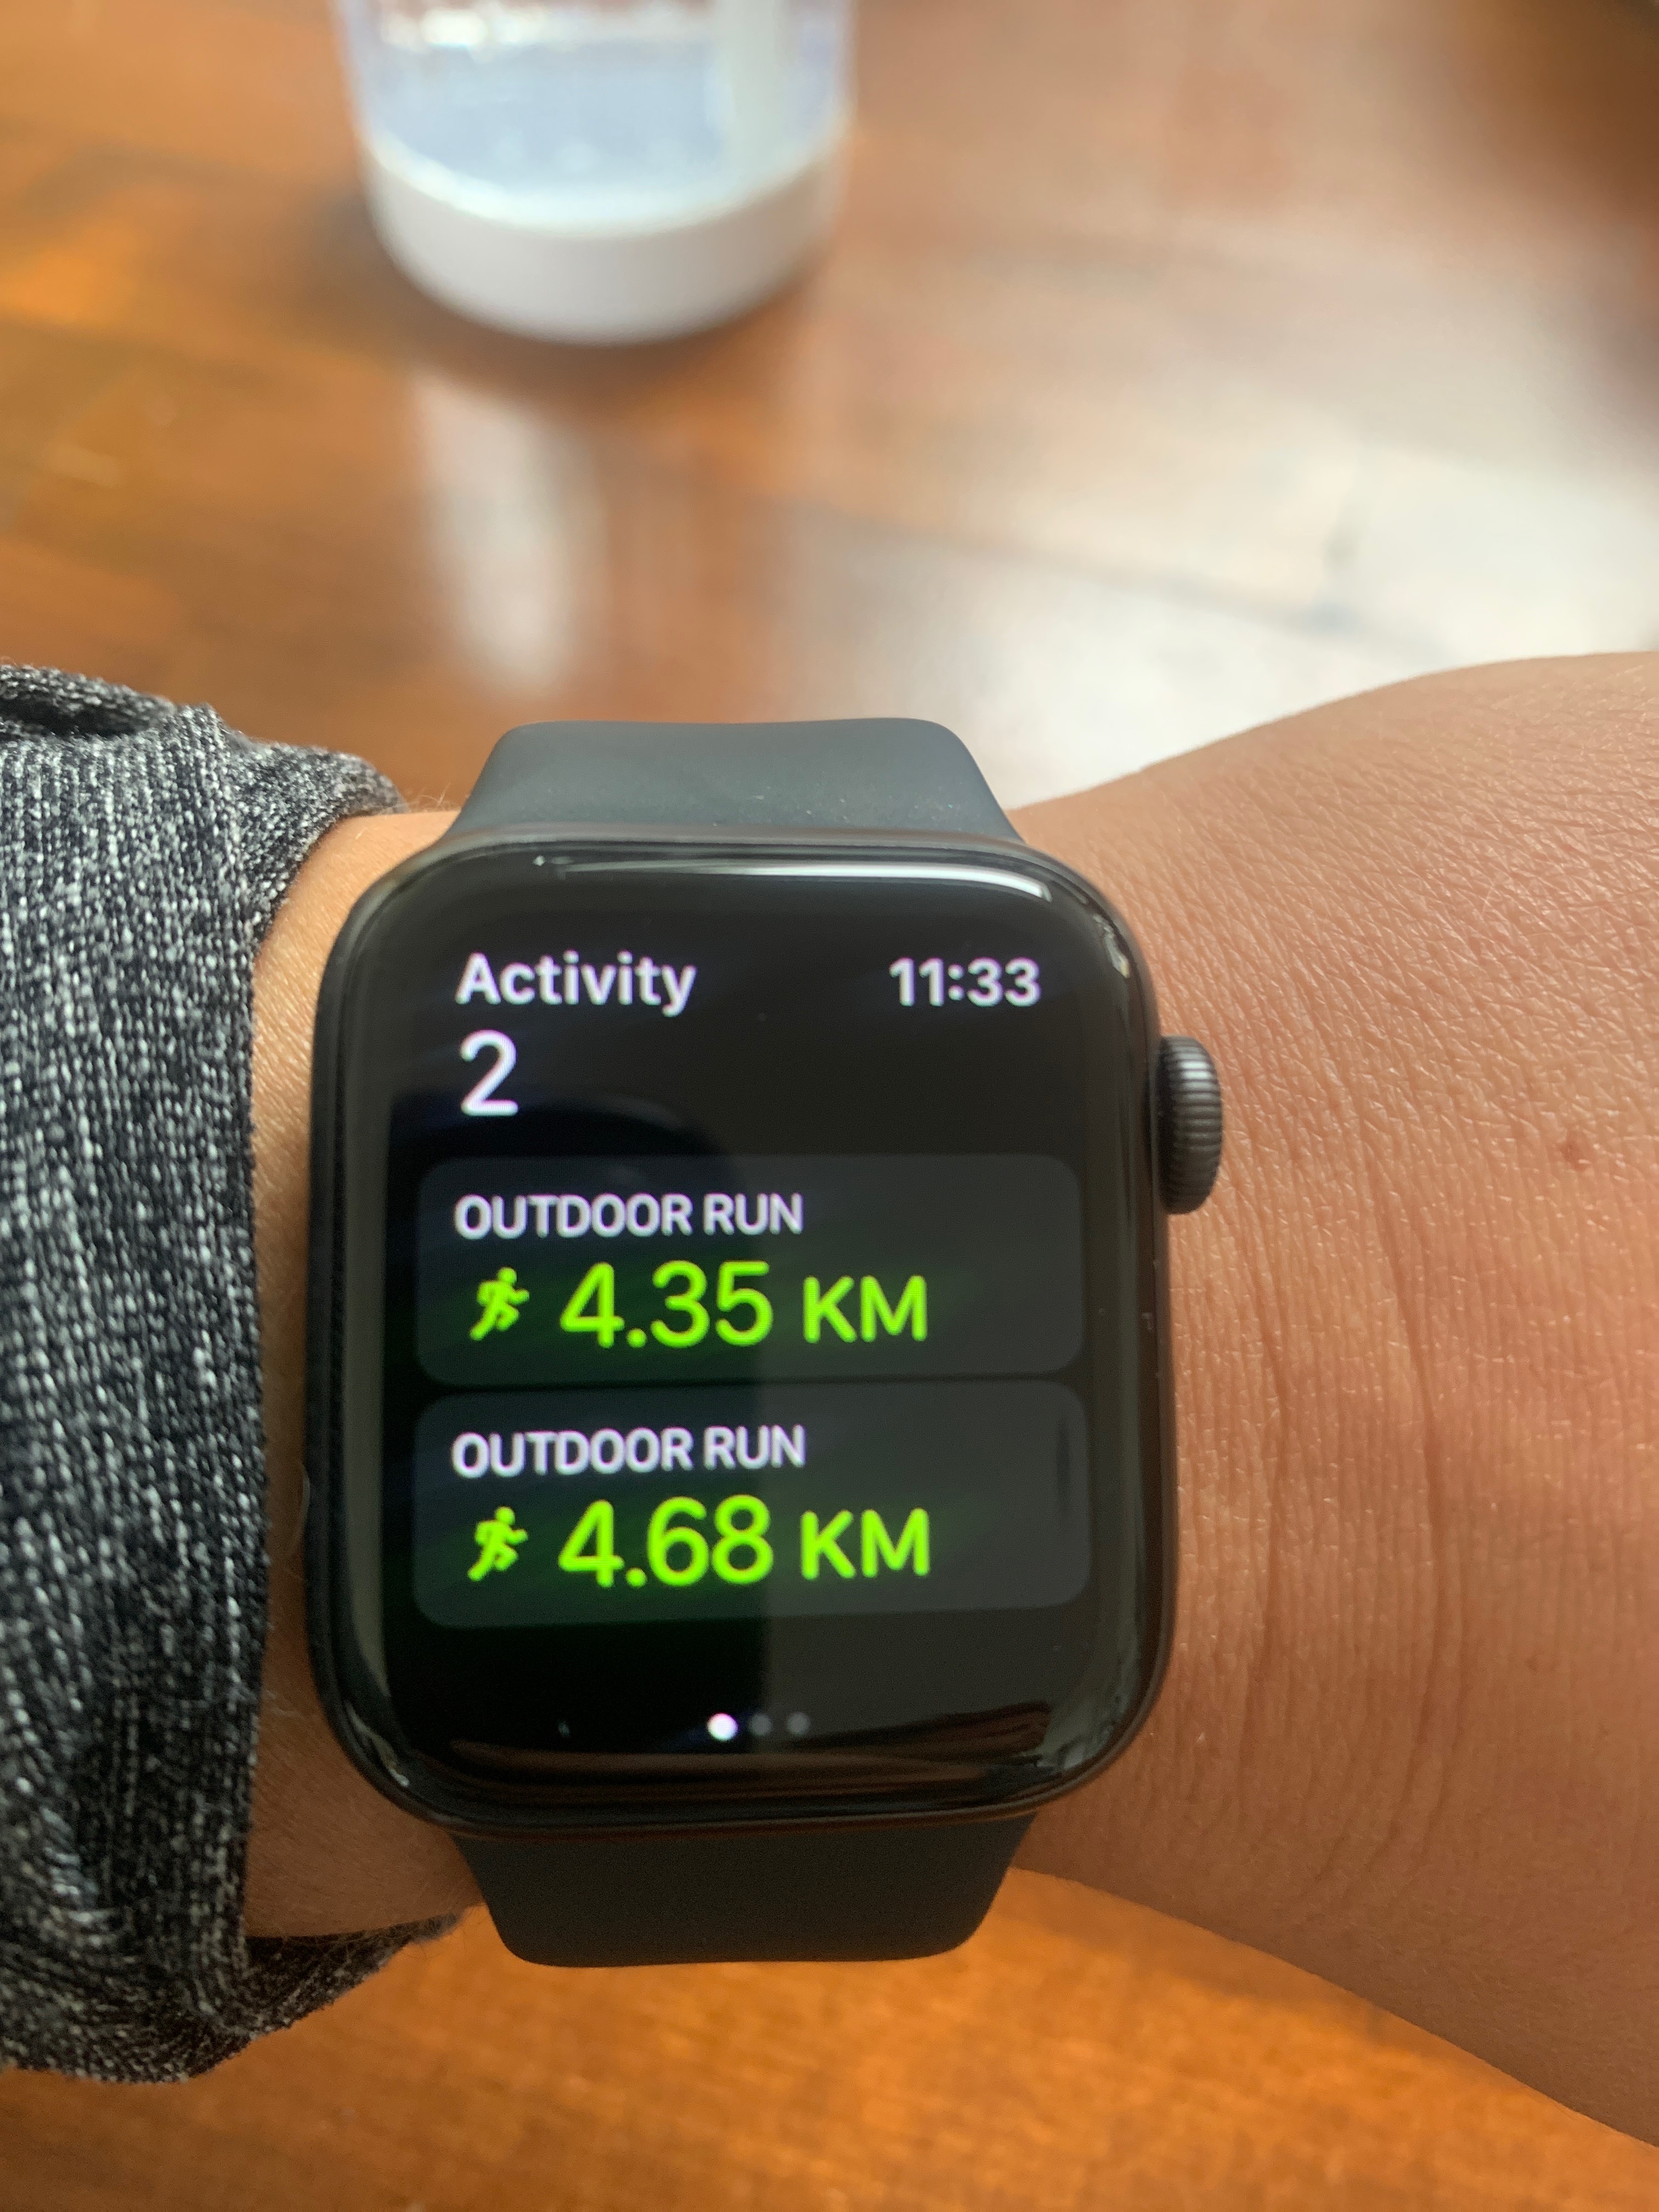 apple watch and map my run